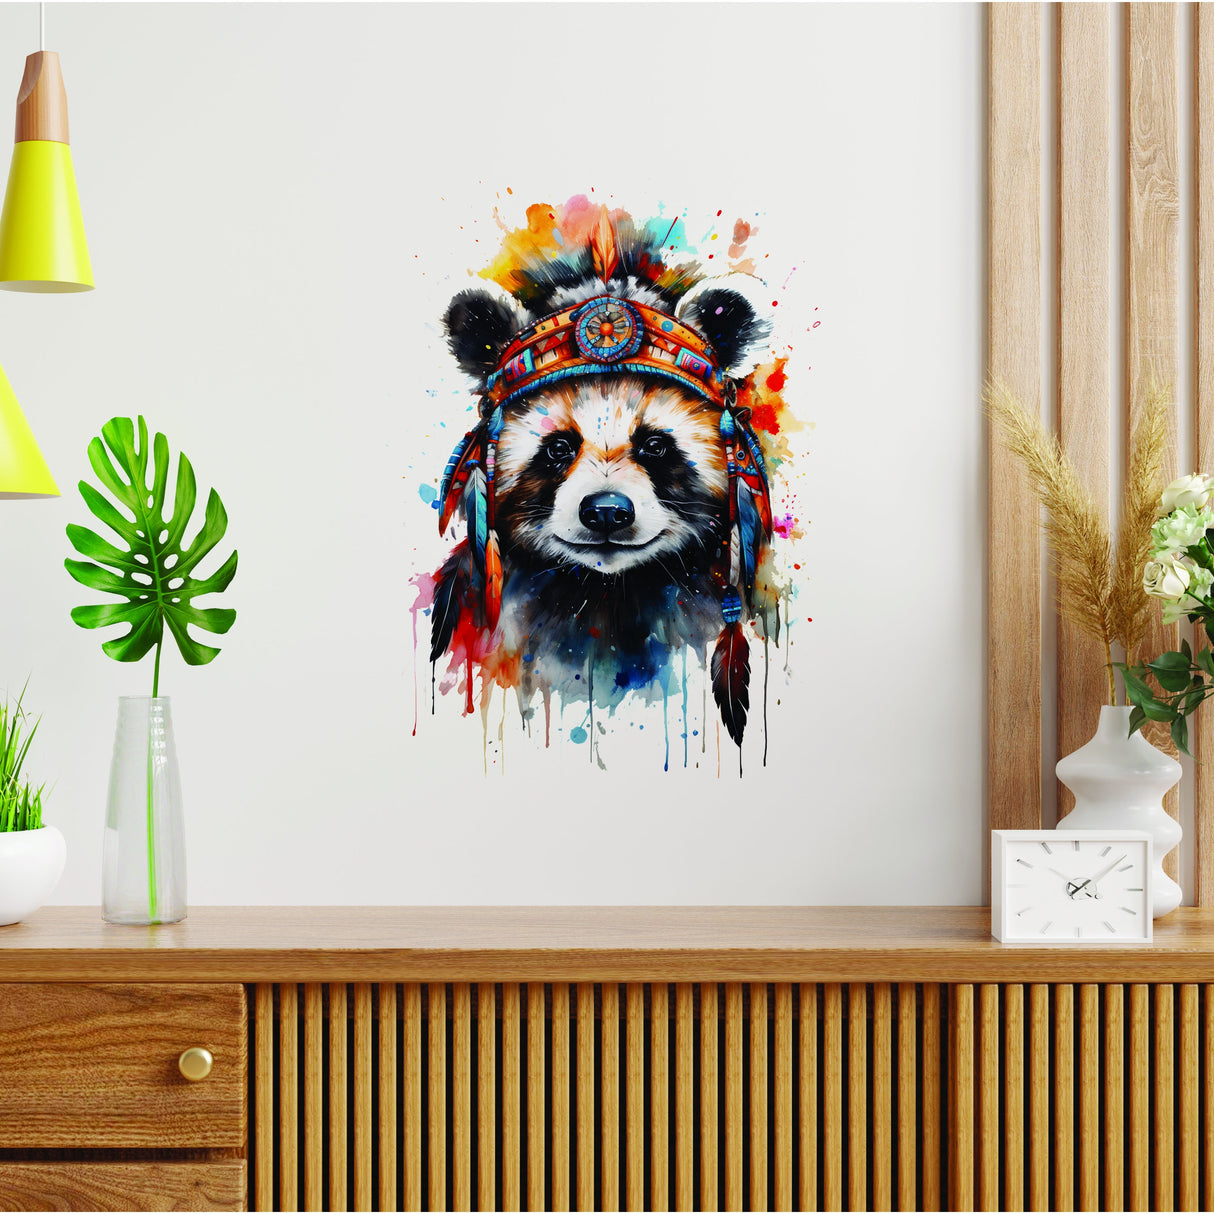 Panda-themed Wall Sticker, Removable Paradise Panda Decal for Wall Decor